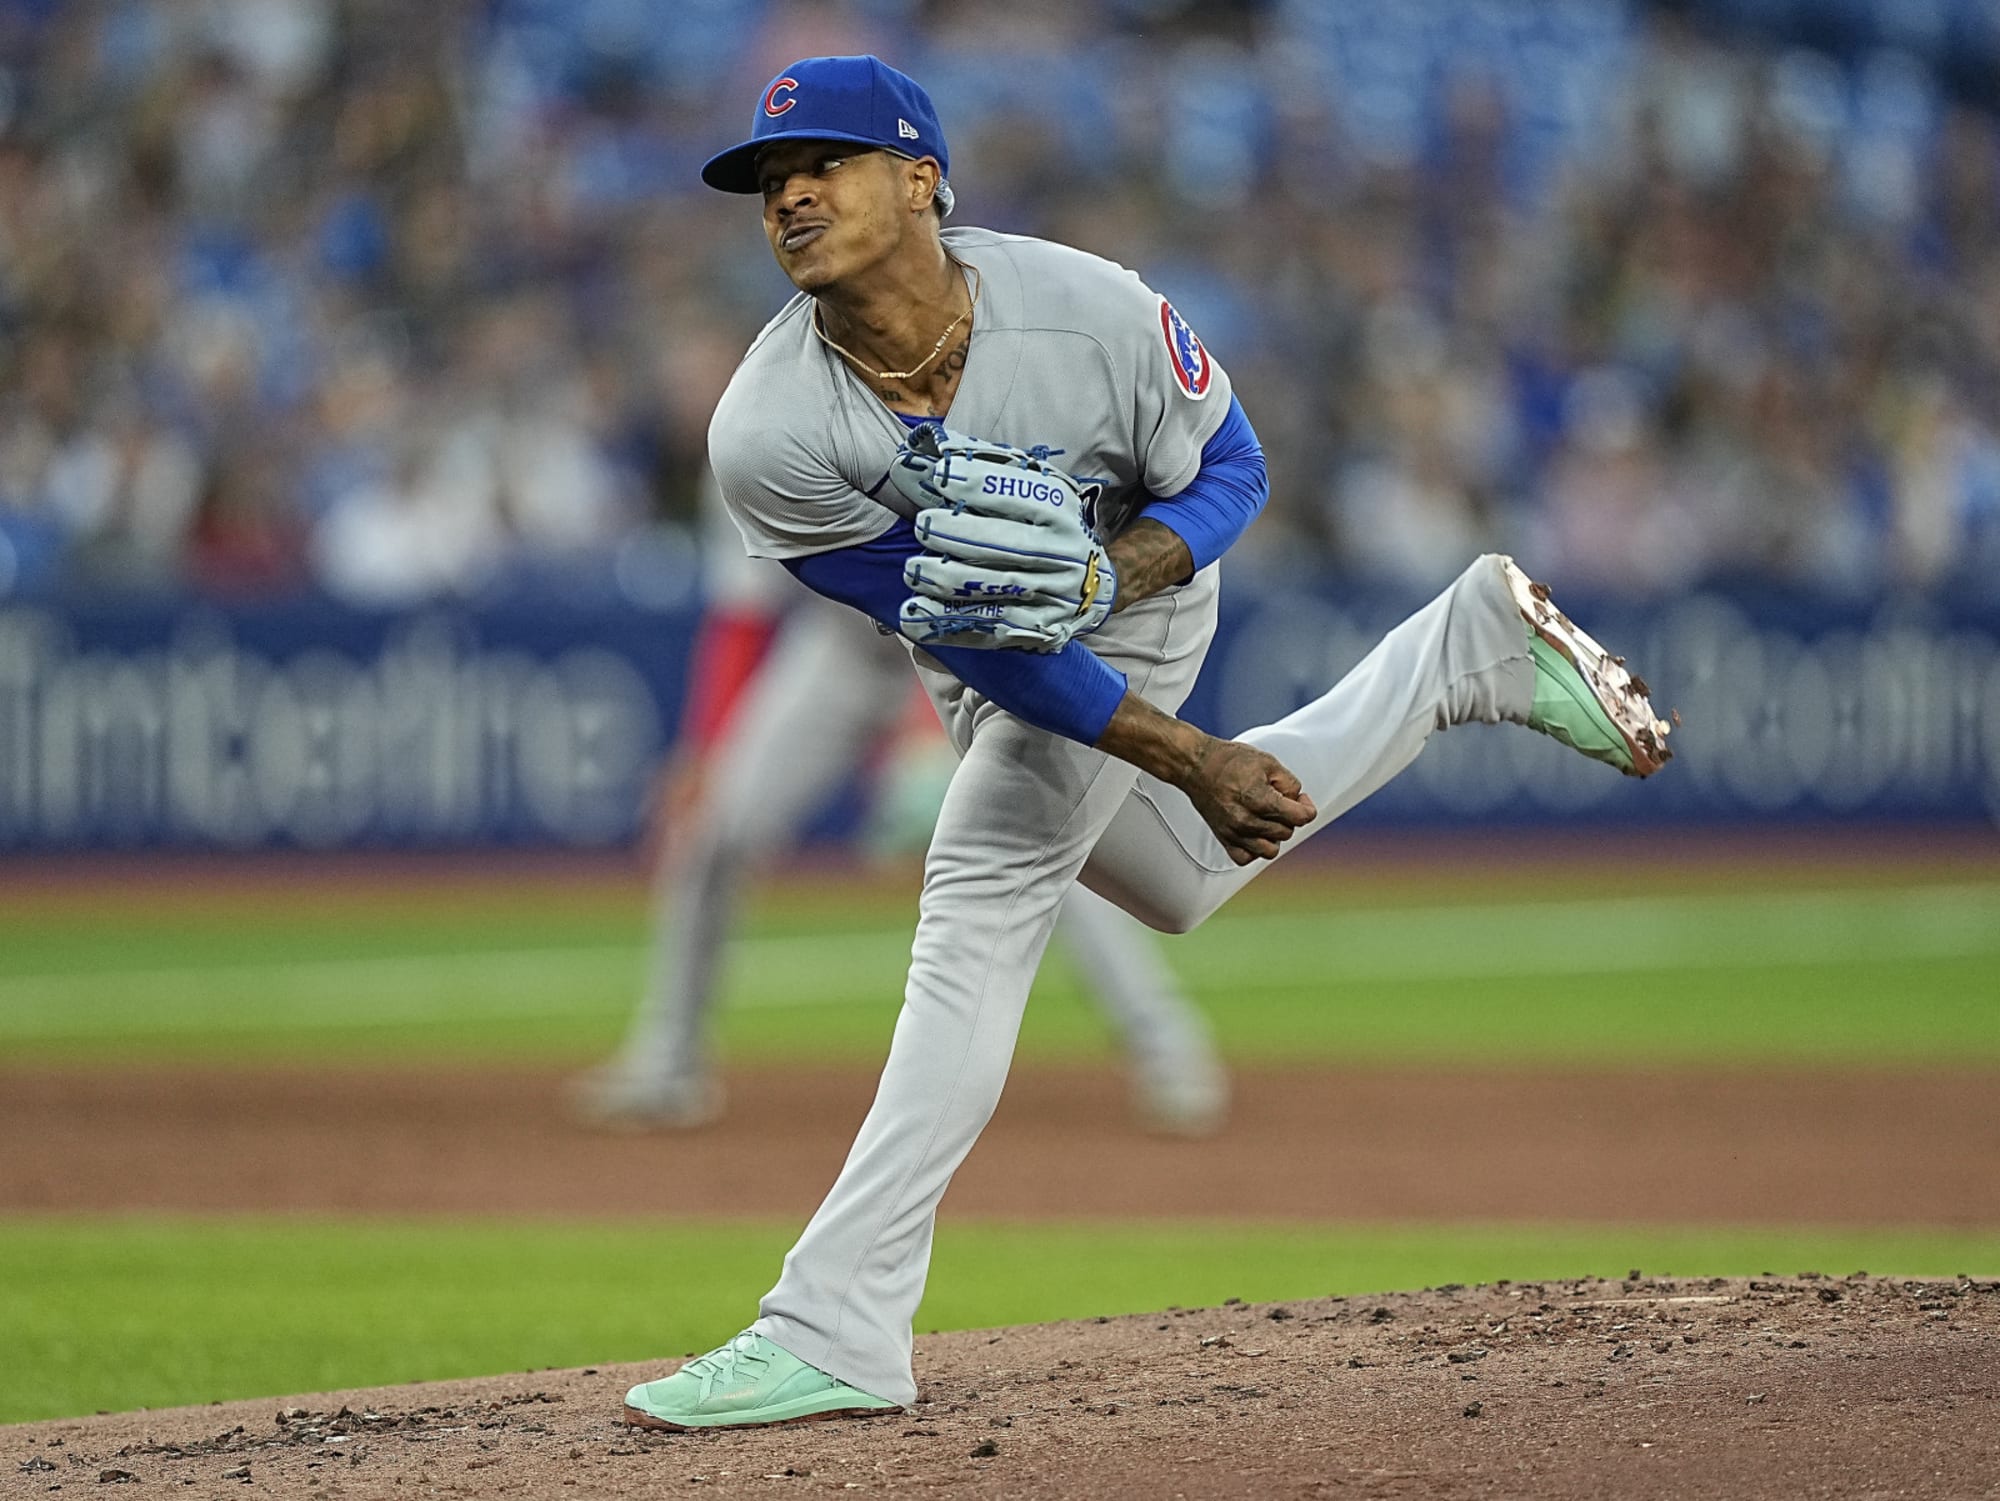 How did Marcus Stroman's outing rank against other Blue Jays